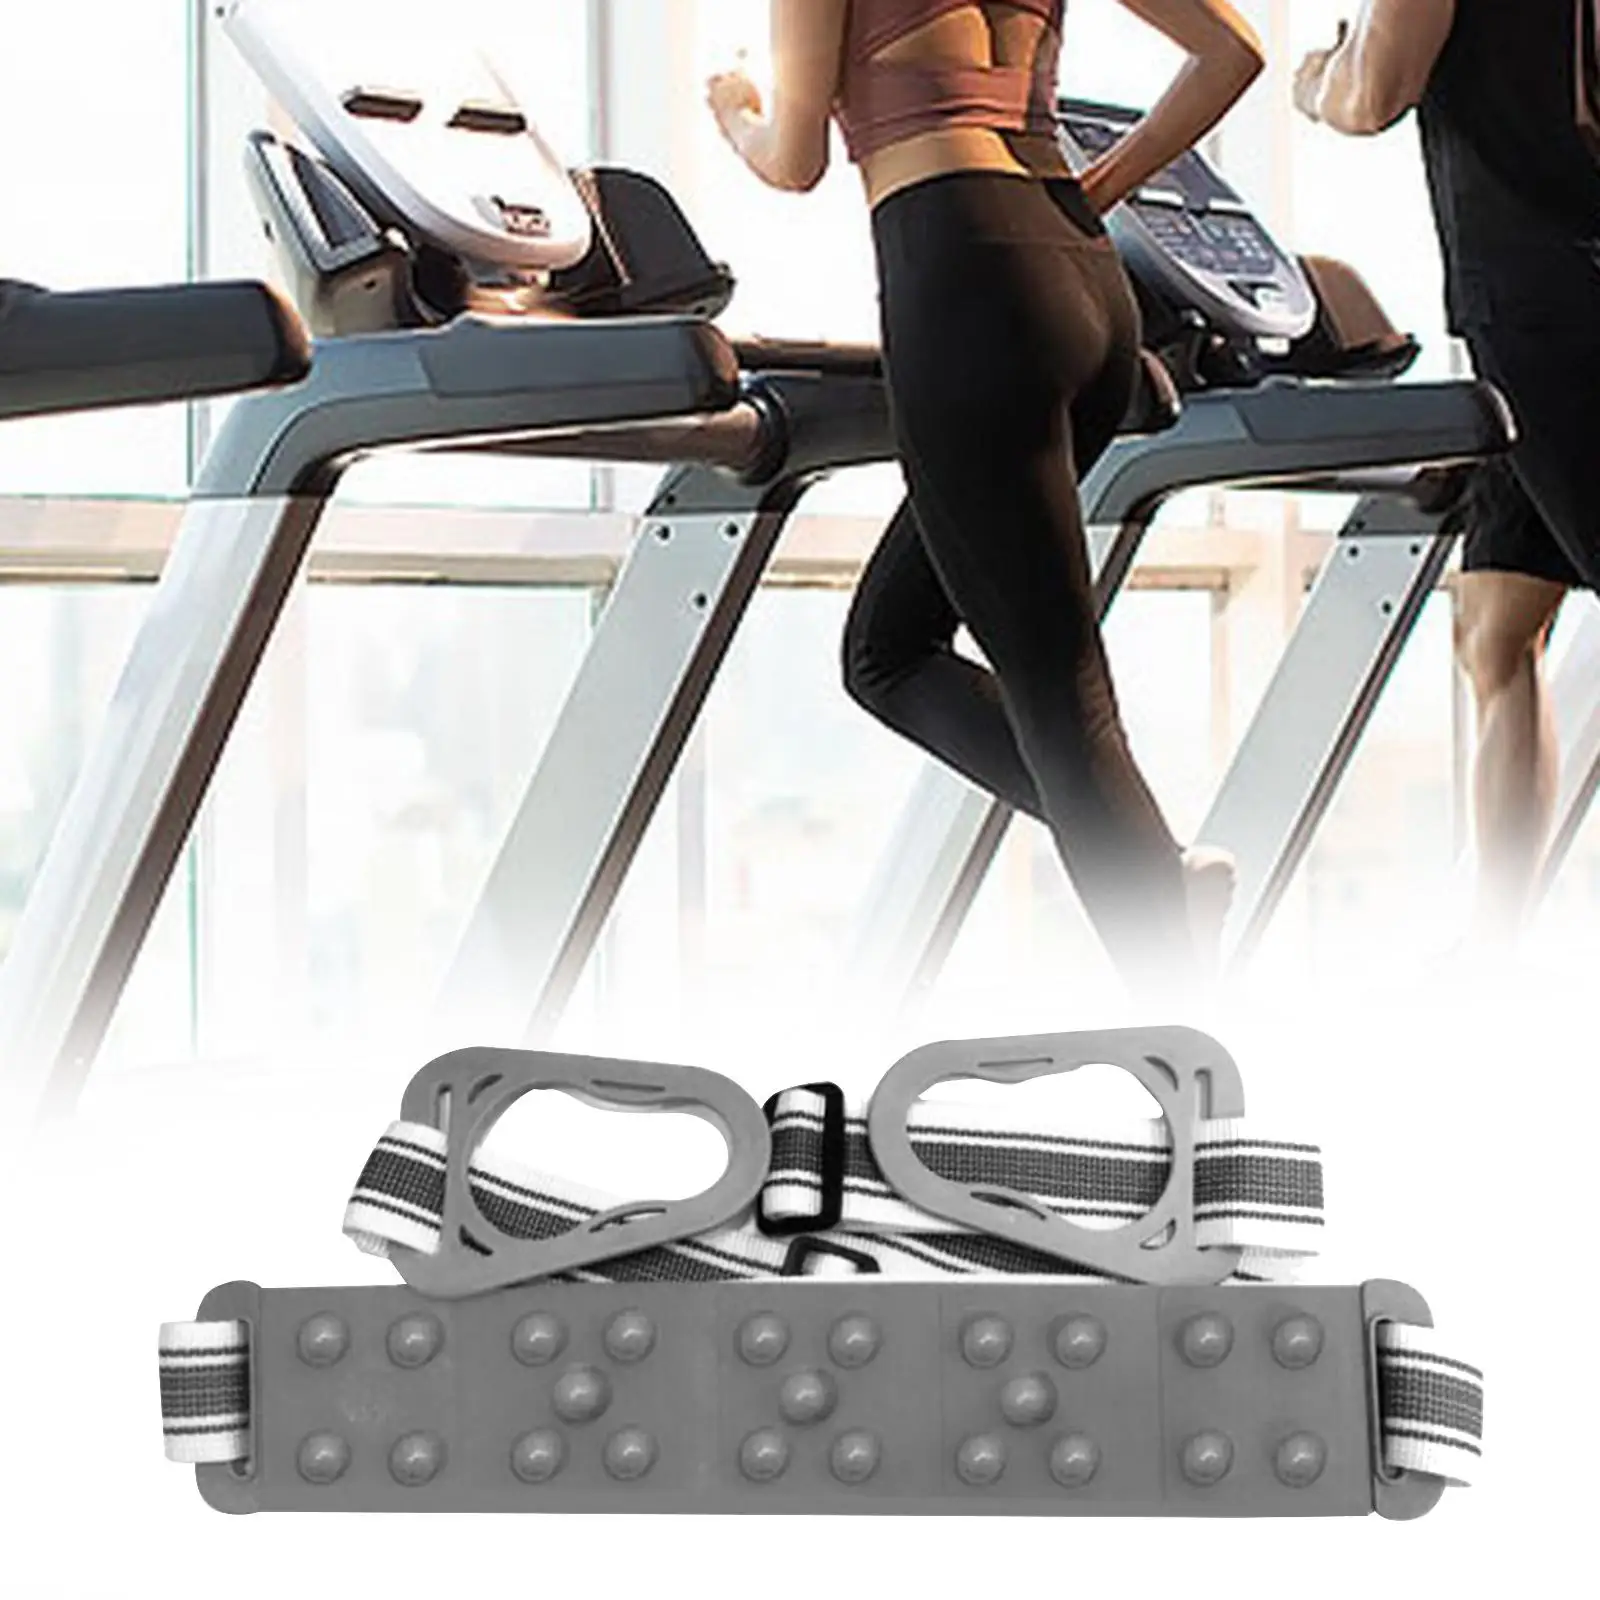 Treadmill Massage Belt Accessory Supplies Workout Equipment Portable Fitness Device Vibrating Machine Belts for Home Exercise